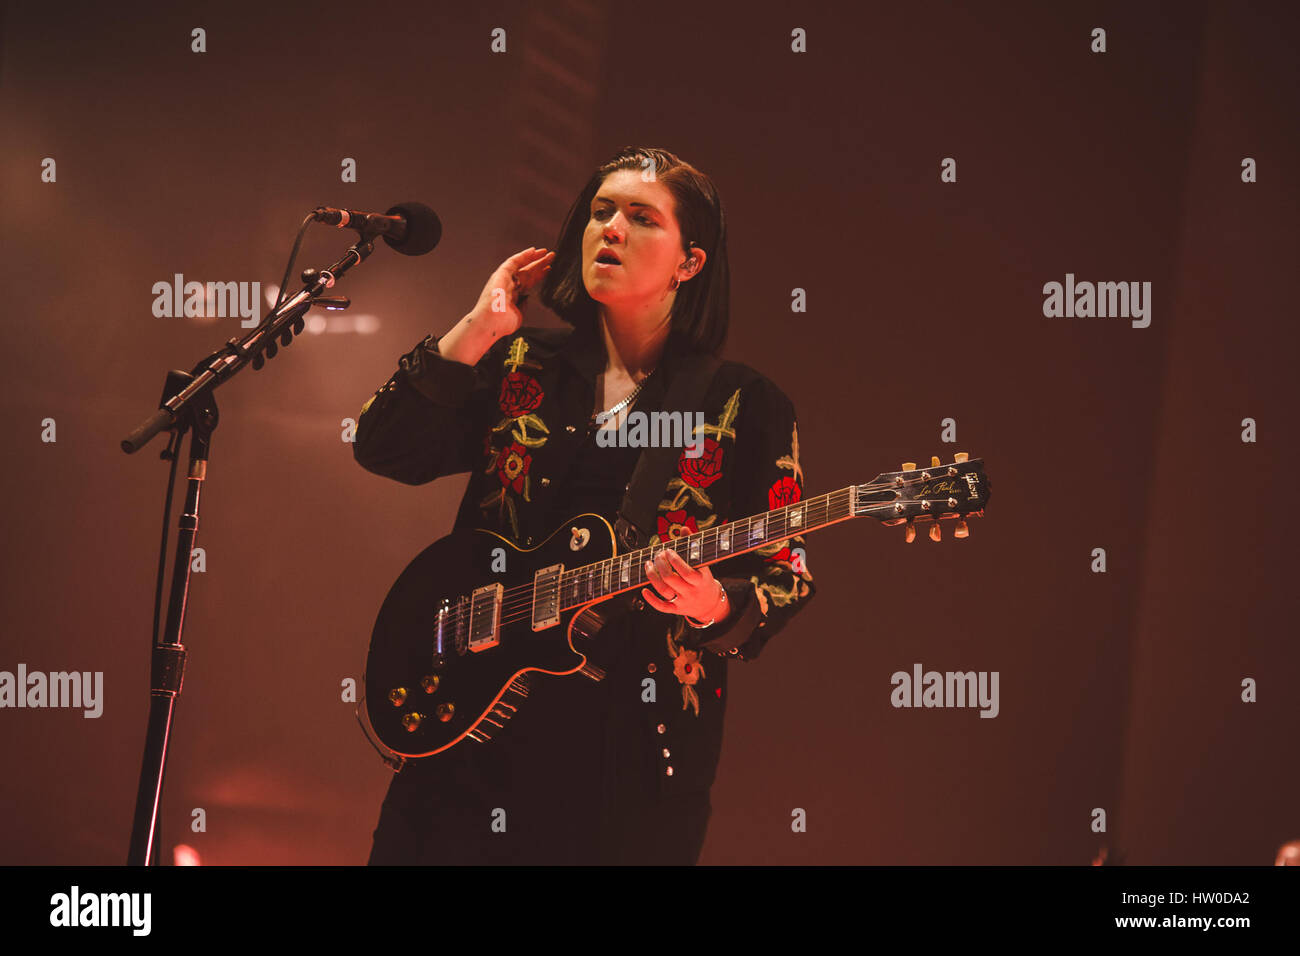 London, UK. March 15, 2017 - Romy Madley Croft, of the British band The XX, performs at the Brixton O2 Academy on the final night of the band's 7 day residency at the venue in London, 2017 Credit: Myles Wright/ZUMA Wire/Alamy Live News Stock Photo